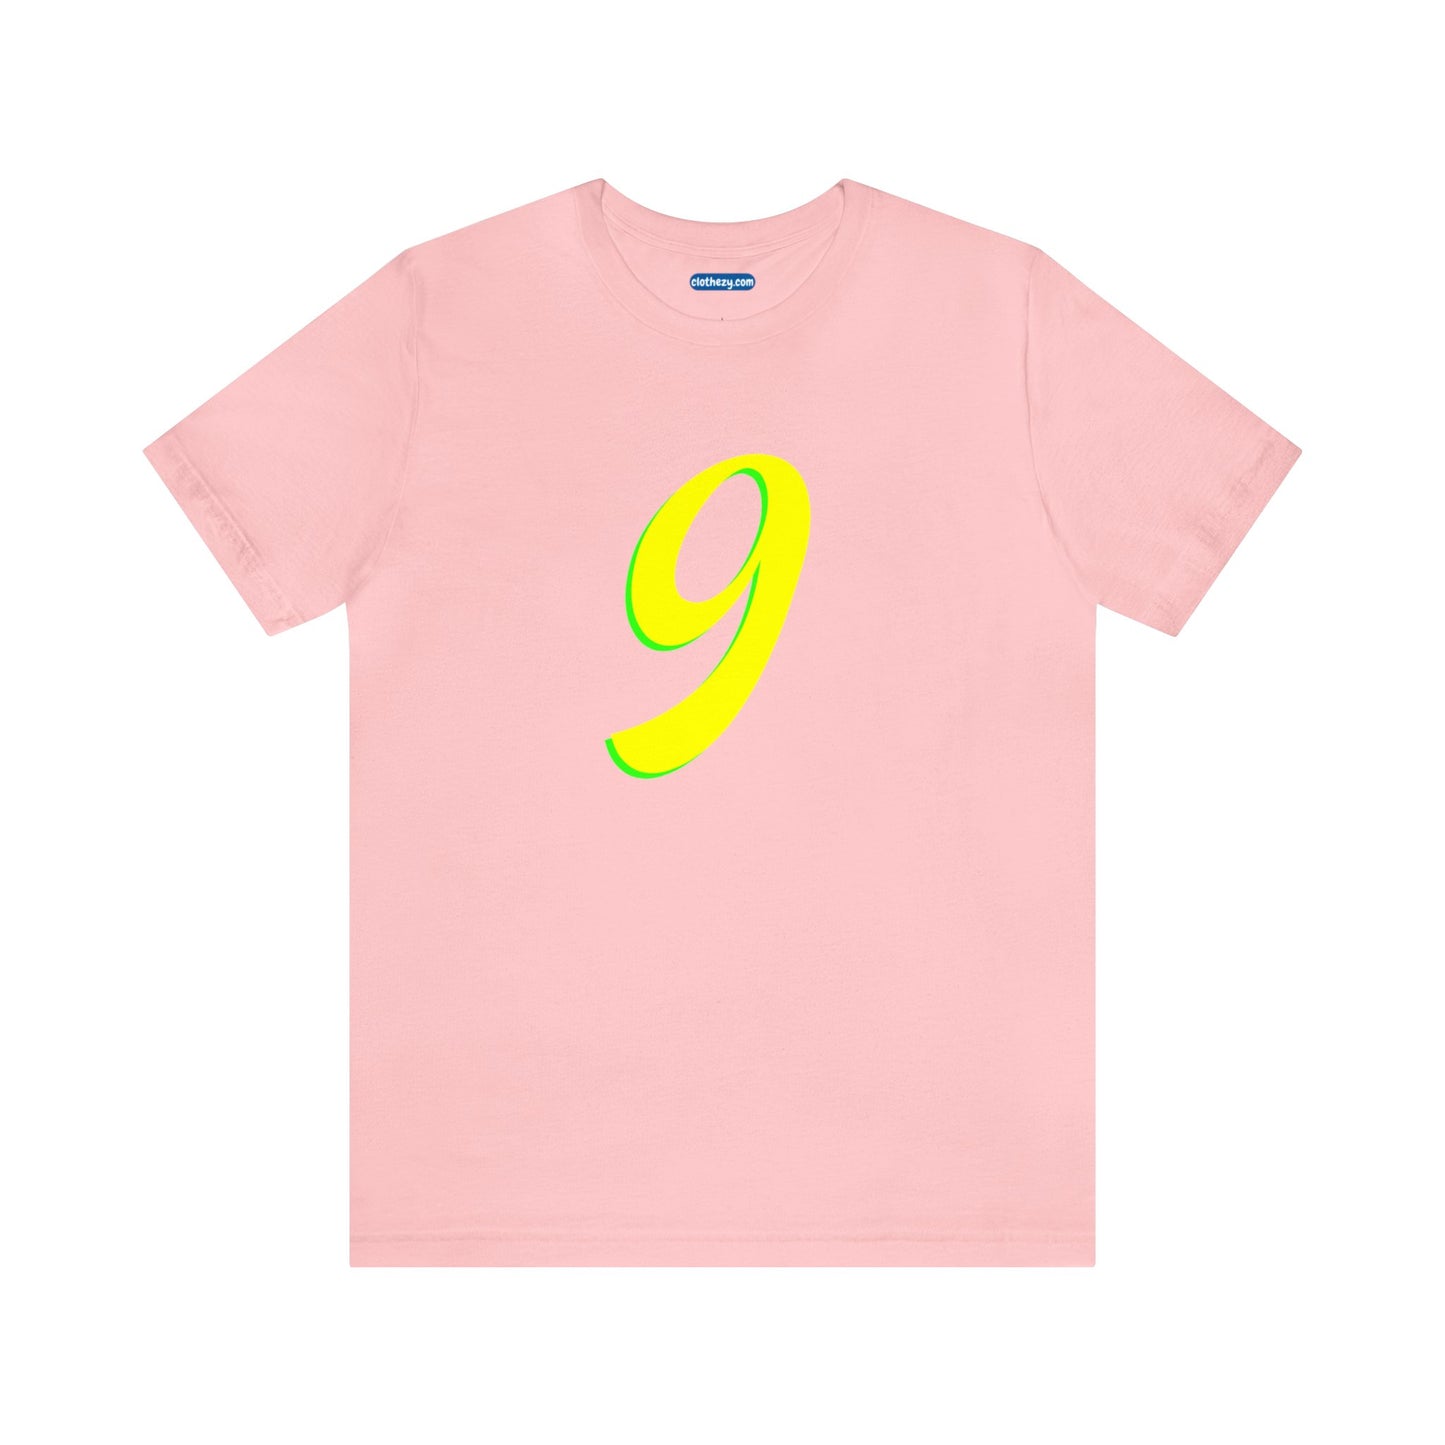 Number 9 Design - Soft Cotton Tee for birthdays and celebrations, Gift for friends and family, Multiple Options by clothezy.com in Pink Size Small - Buy Now